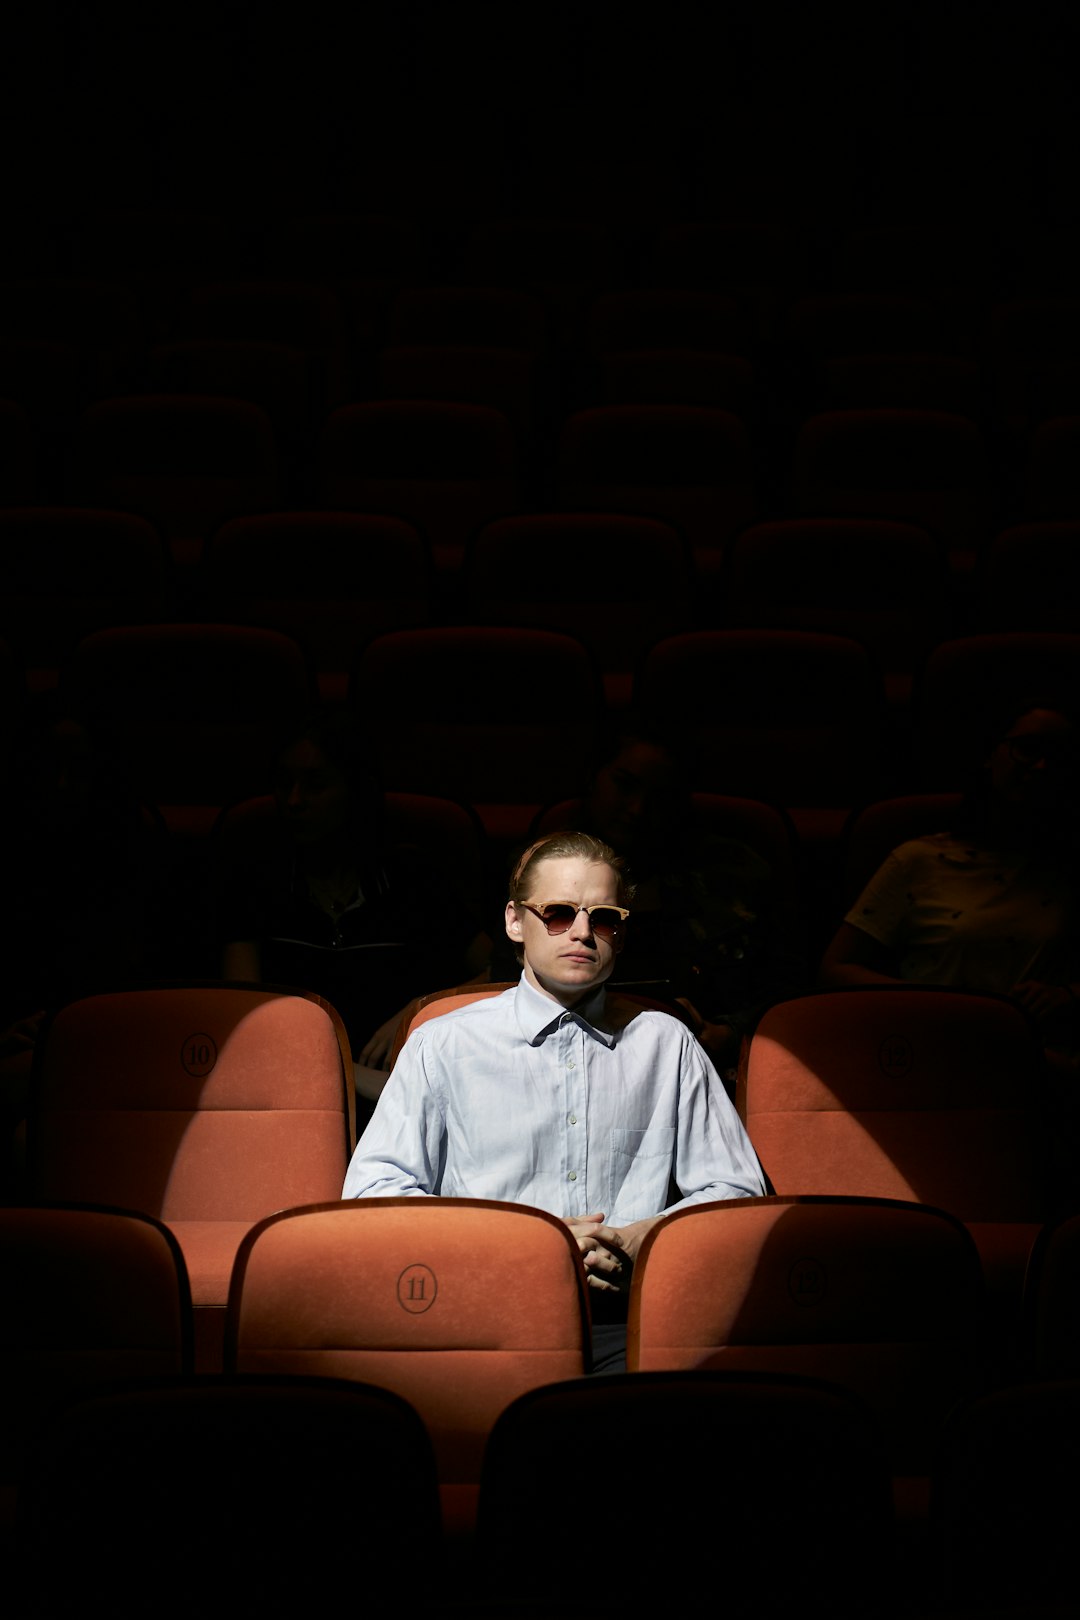 A lone man sitting under the spotlight in the theatre hall.